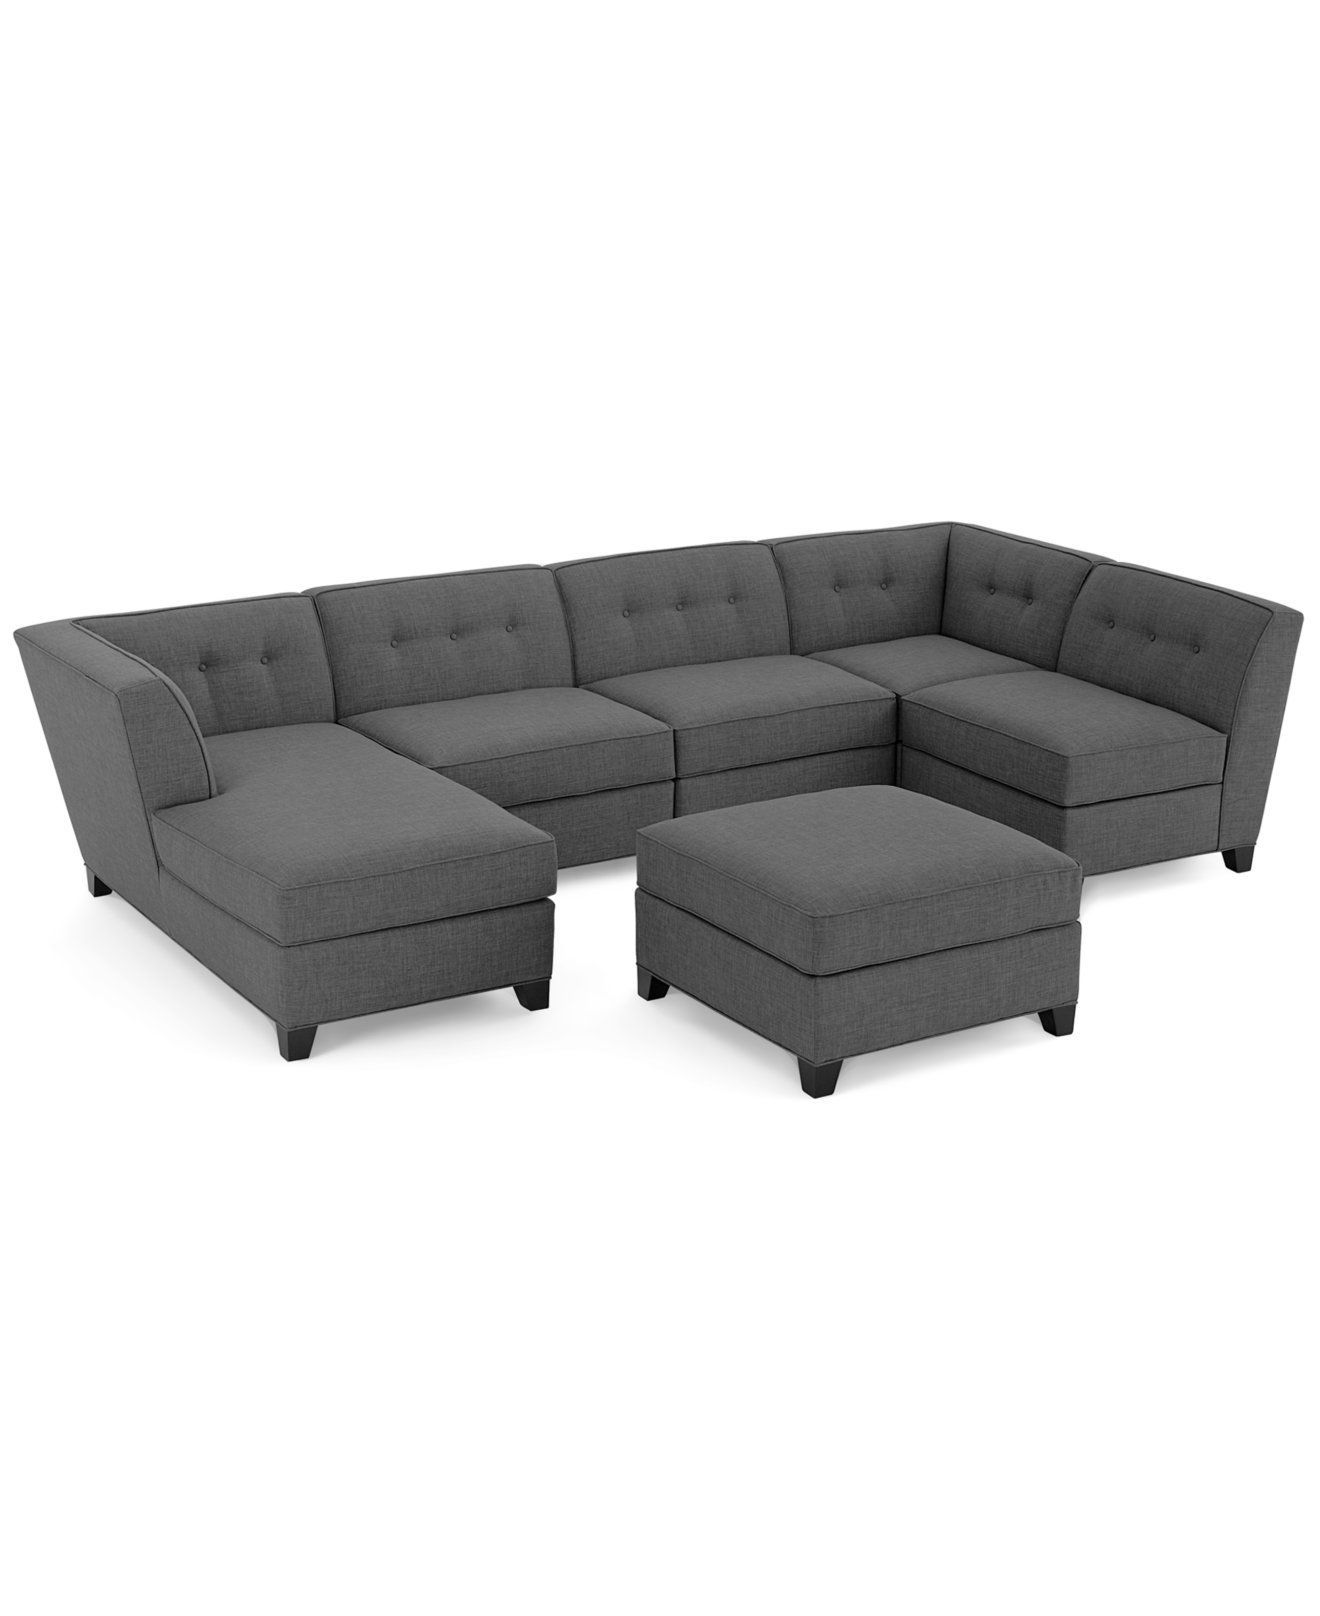 Element Right Side Chaise Sectional Sofas In Dark Gray Linen And Walnut Legs Intended For Newest Right Arm Chaise Lounge – Ideas On Foter (View 23 of 25)